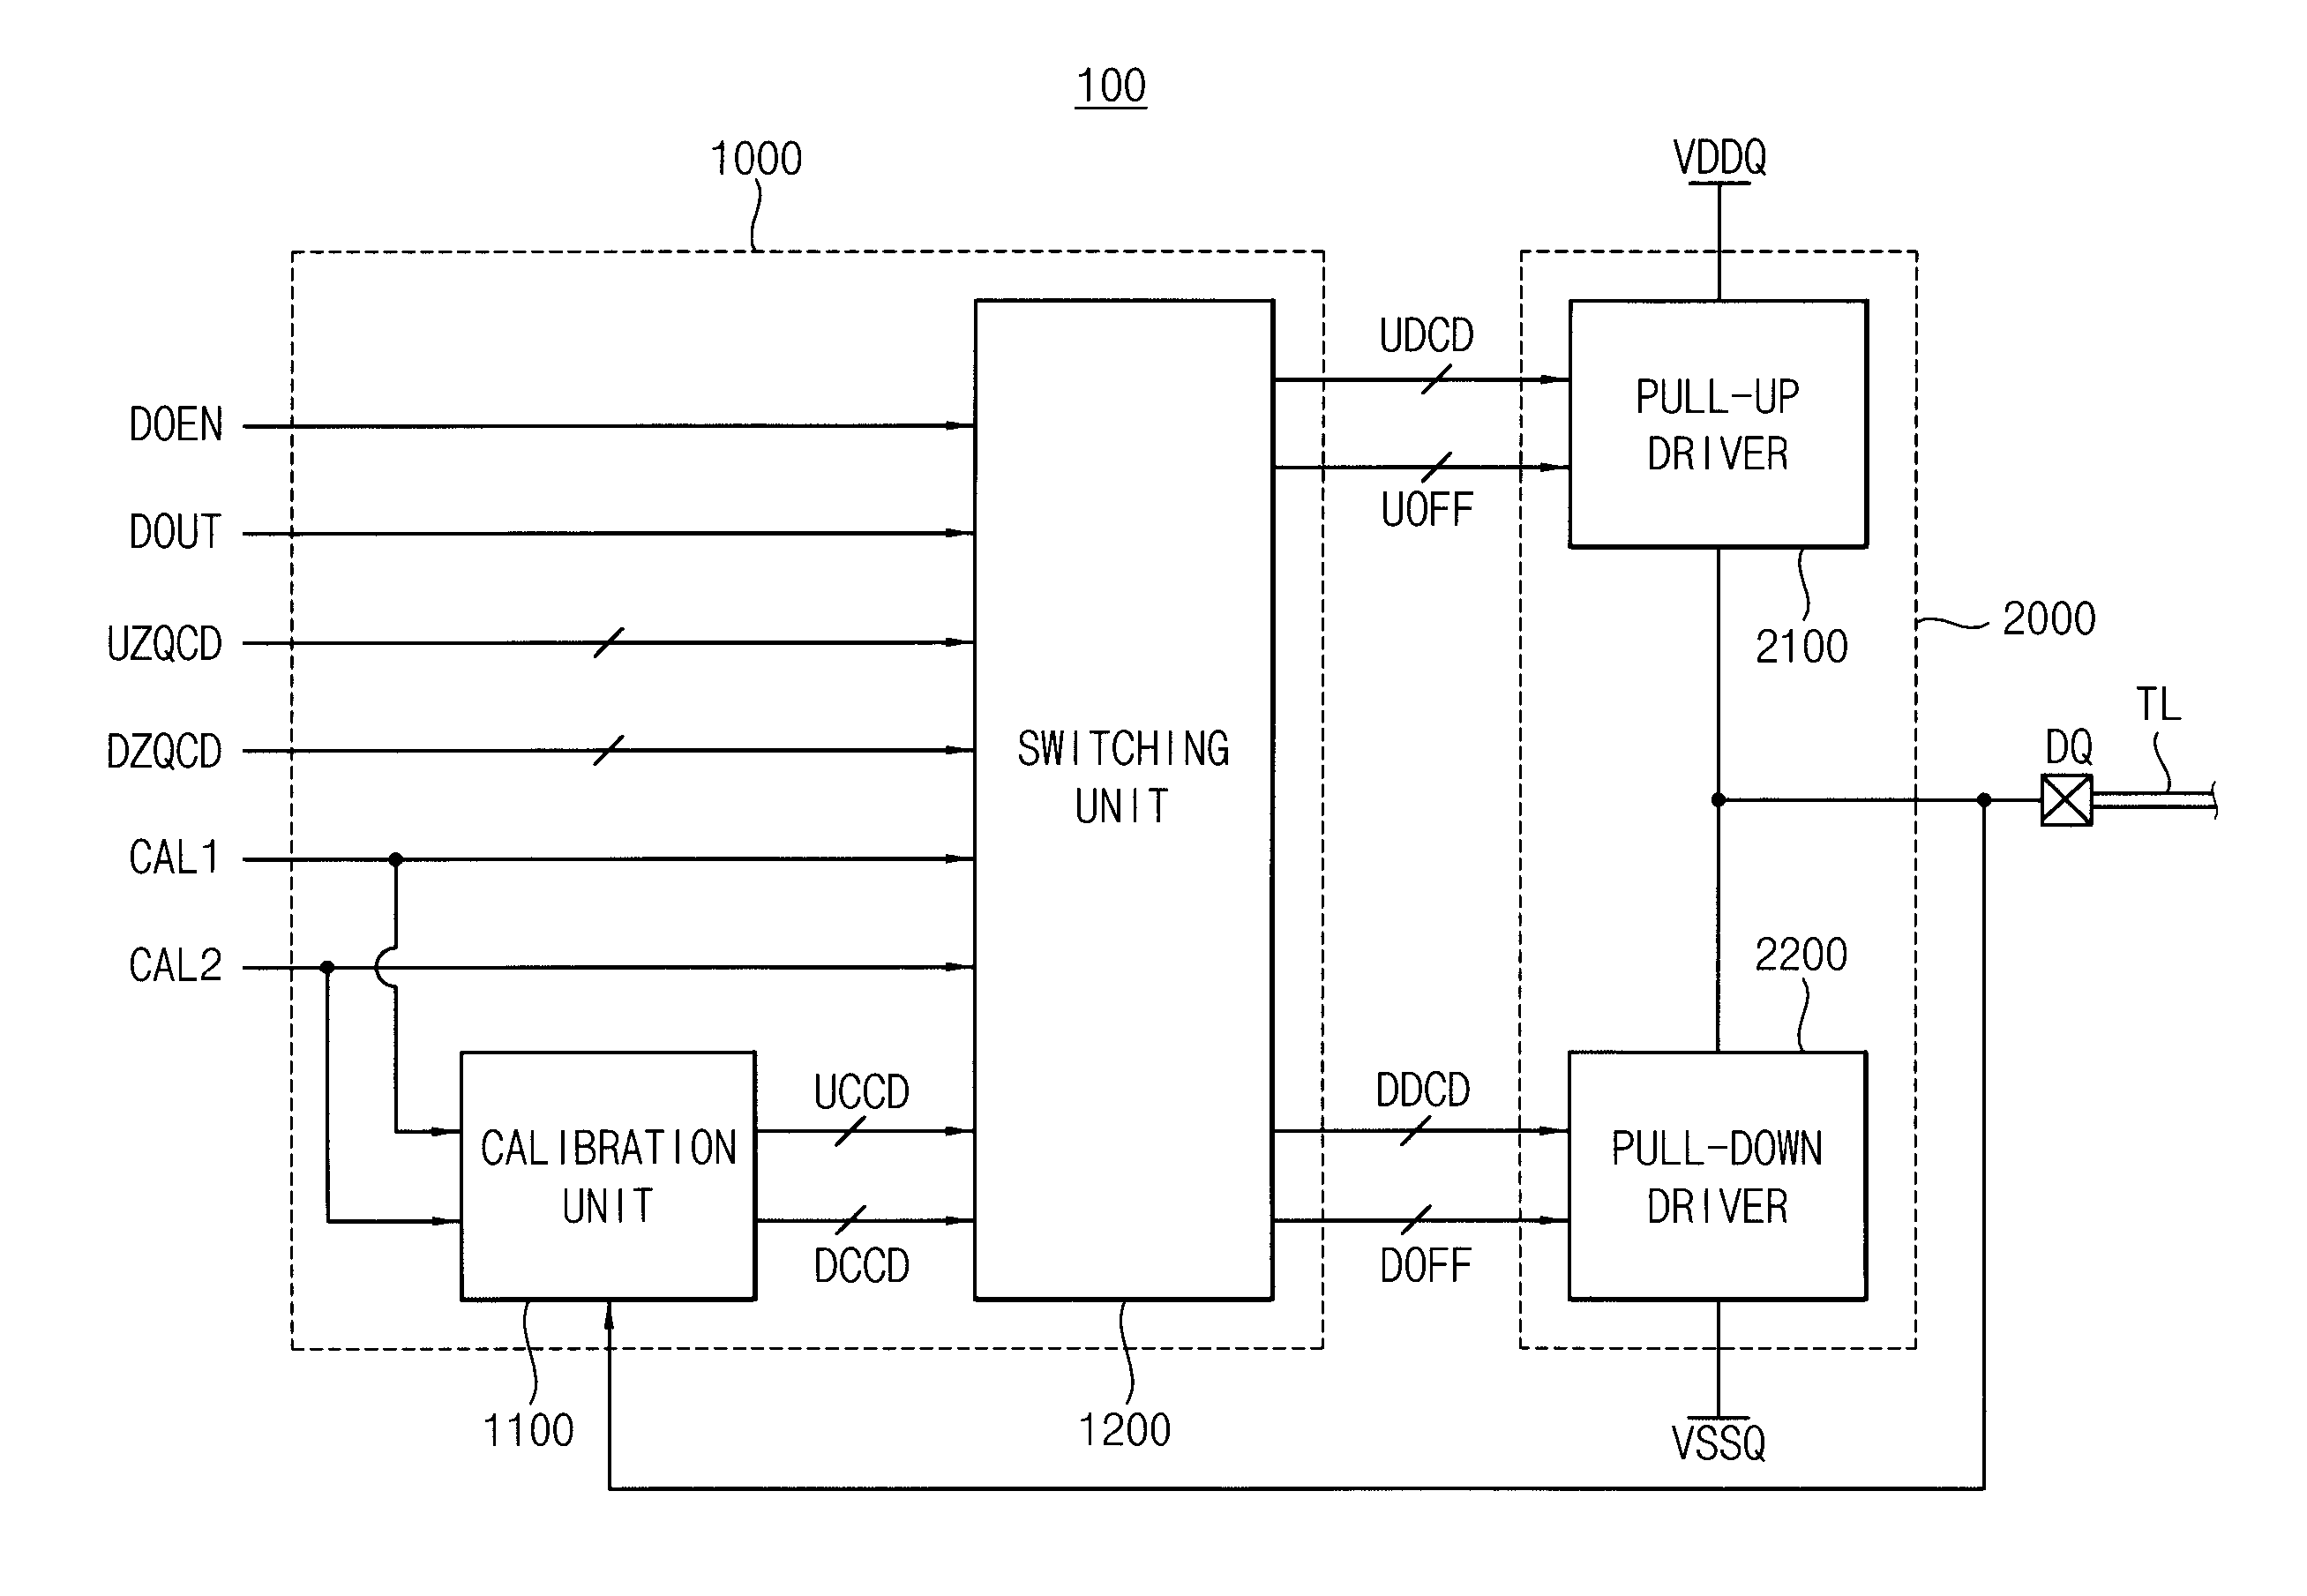 Data output buffer and memory device